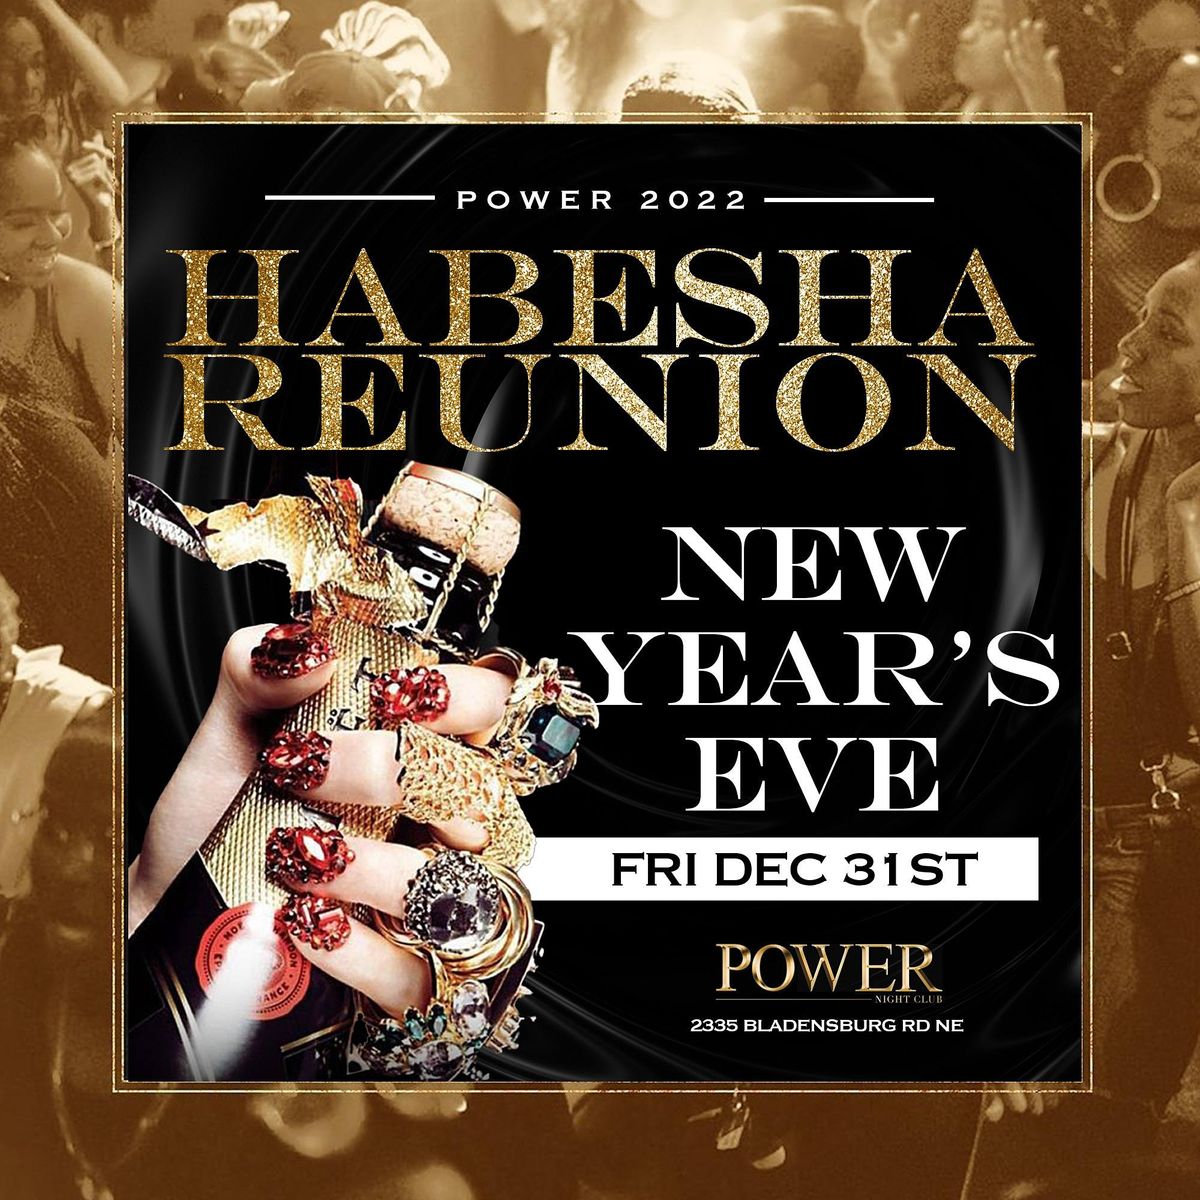 THE 4TH ANNUAL HABESHA REUNION NEW YEARS EVE CELEBRATION IN DC, Power